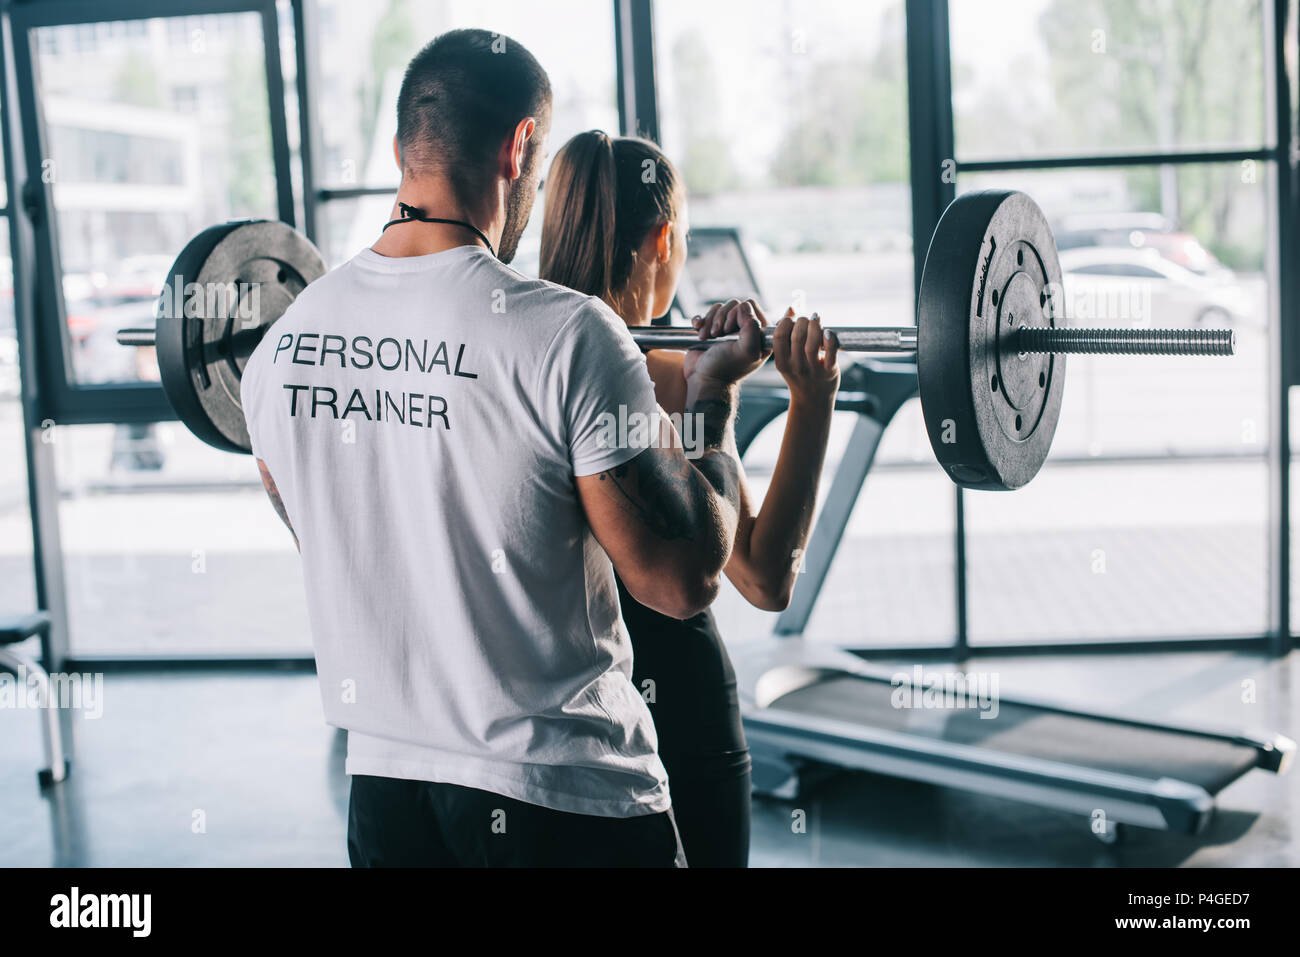 Male Personal Trainer Helping Sportswoman To Do Exercises With Barbell At Gym Stock Photo Alamy